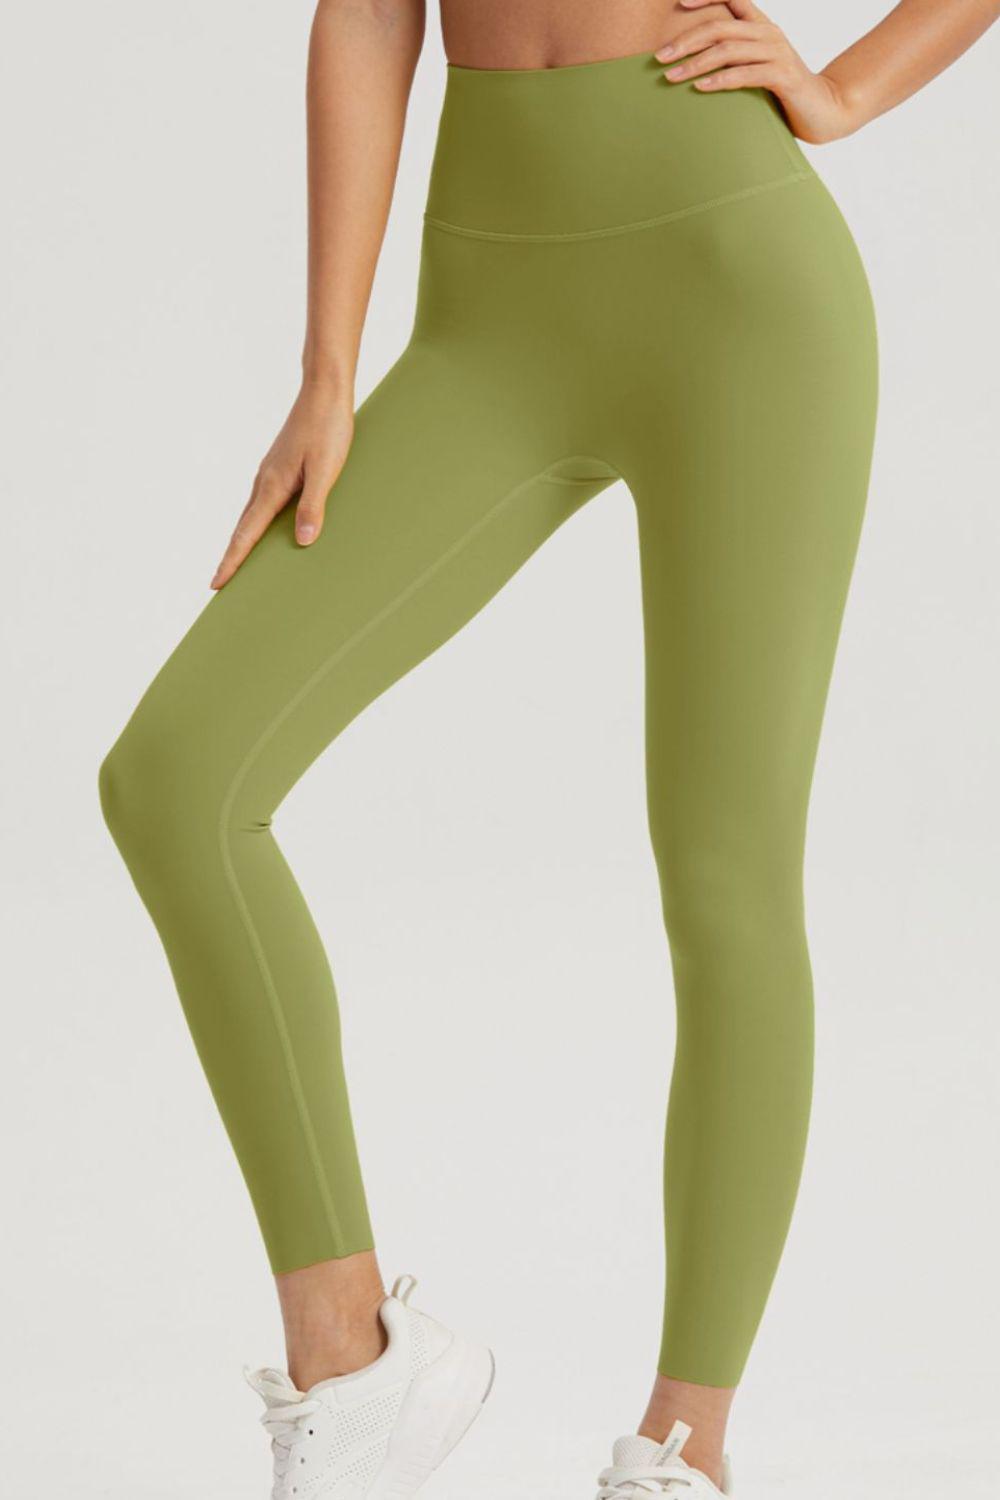 Wide Waistband Sports Leggings-BOTTOM SIZES SMALL MEDIUM LARGE-[Adult]-[Female]-Chartreuse-4-2022 Online Blue Zone Planet